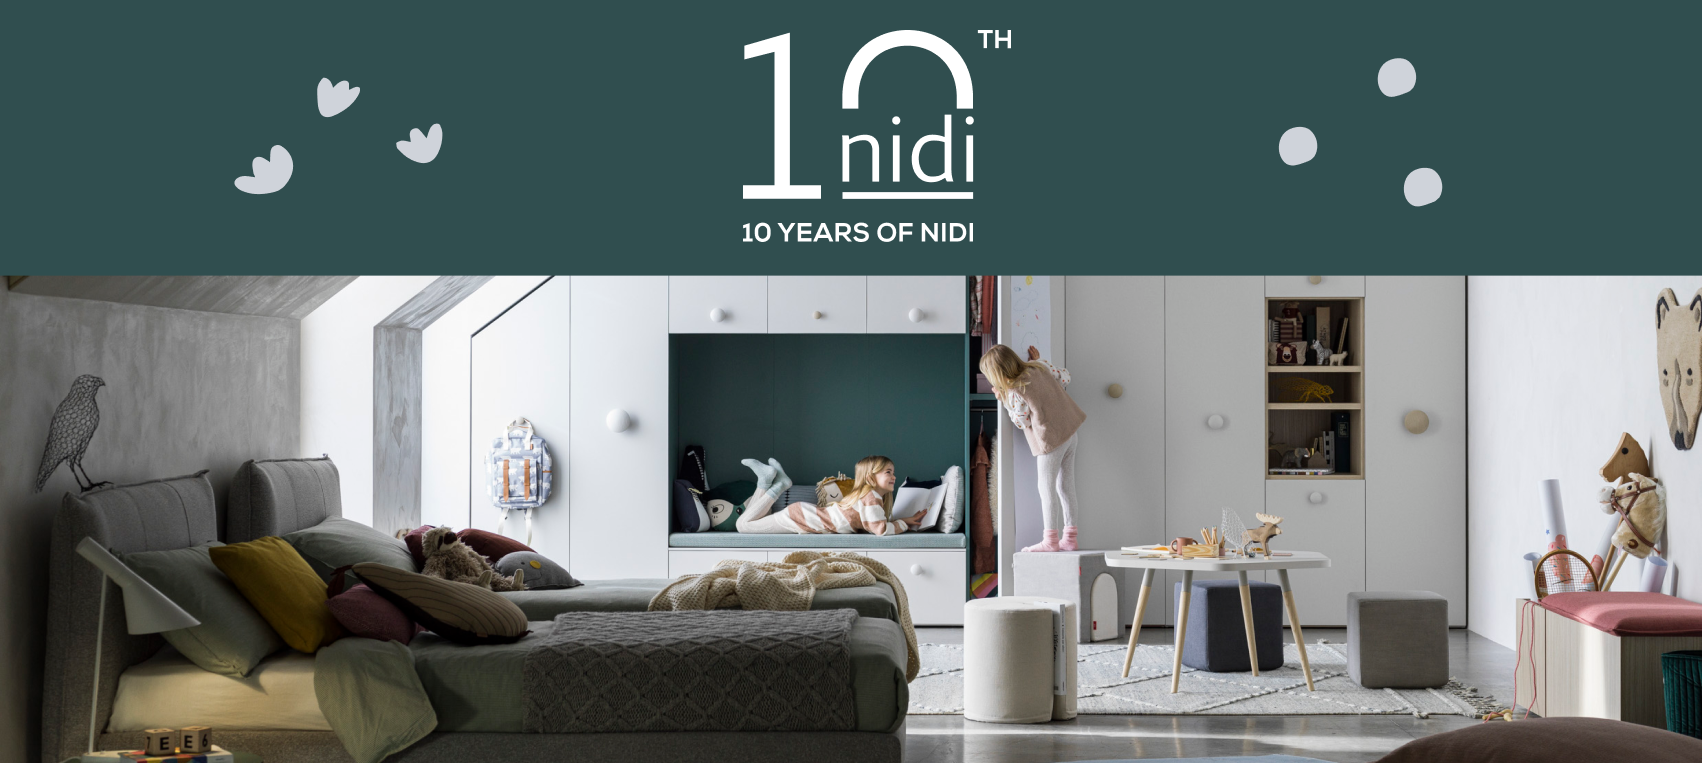 Nidi Design: 10 years of dreams turned into unique spaces